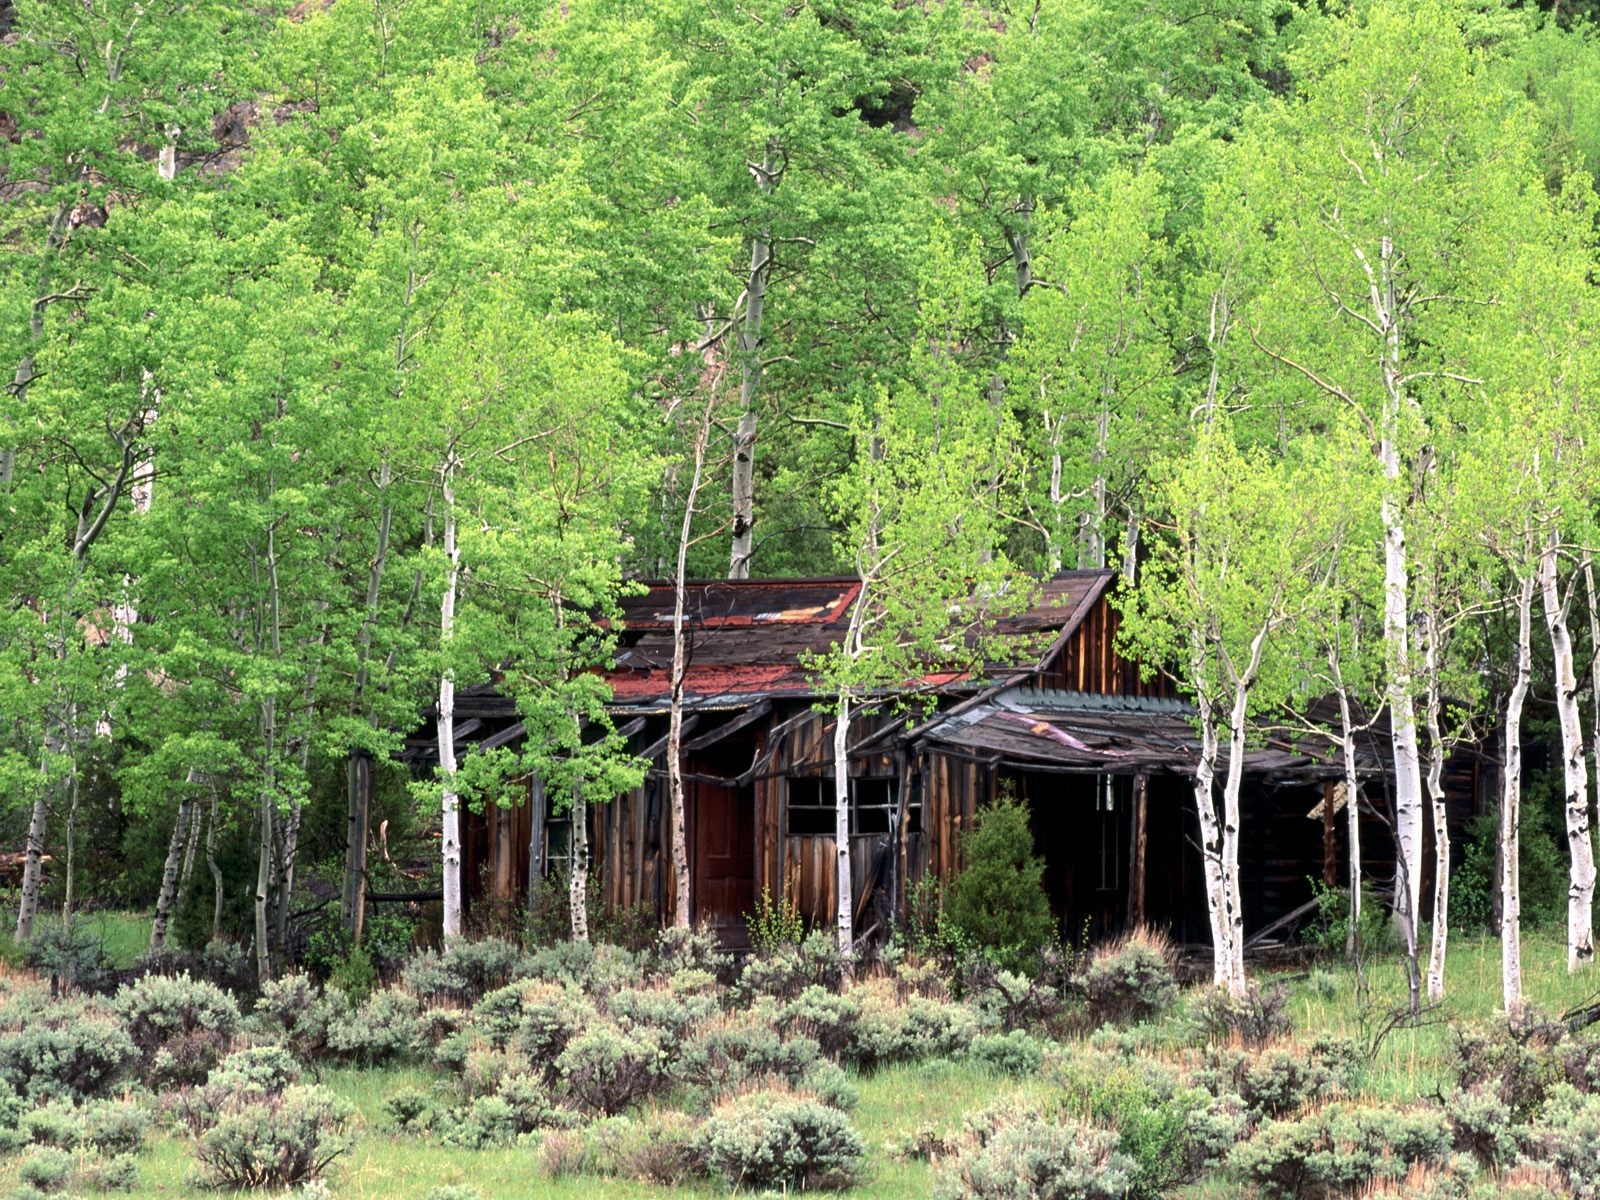 Landscape Cottage Trees Birch Abandoned Cabin Forest Shrubbery Green Shrubs 1600x1200